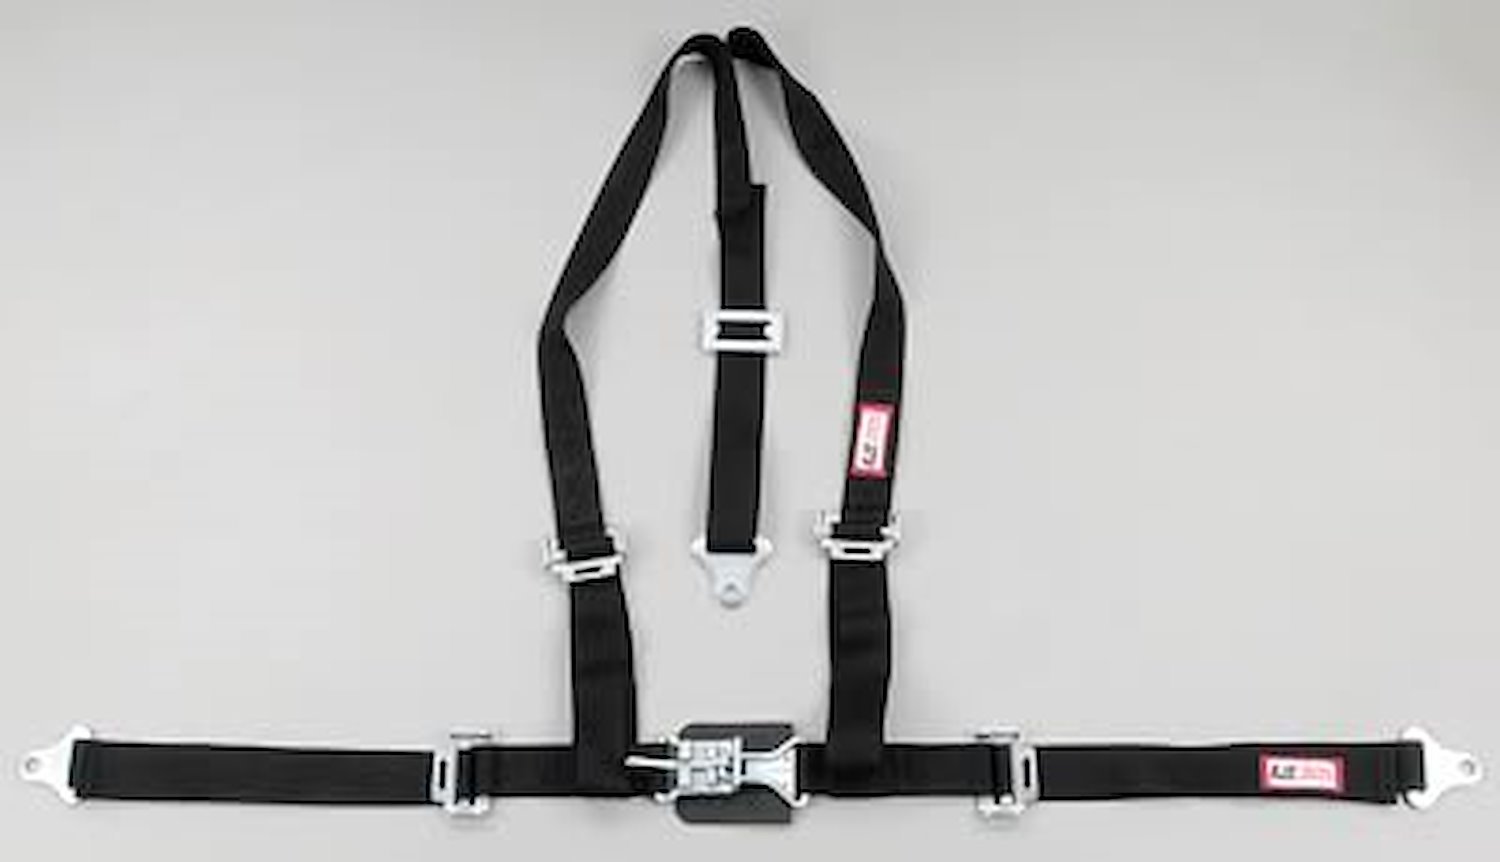 NON-SFI L&L HARNESS 3 PULL DOWN Lap BELT SNAP SEWN IN 2 S.H. Y FLOOR Mount w/STERNUM STRAP WRAP/SNAP RED